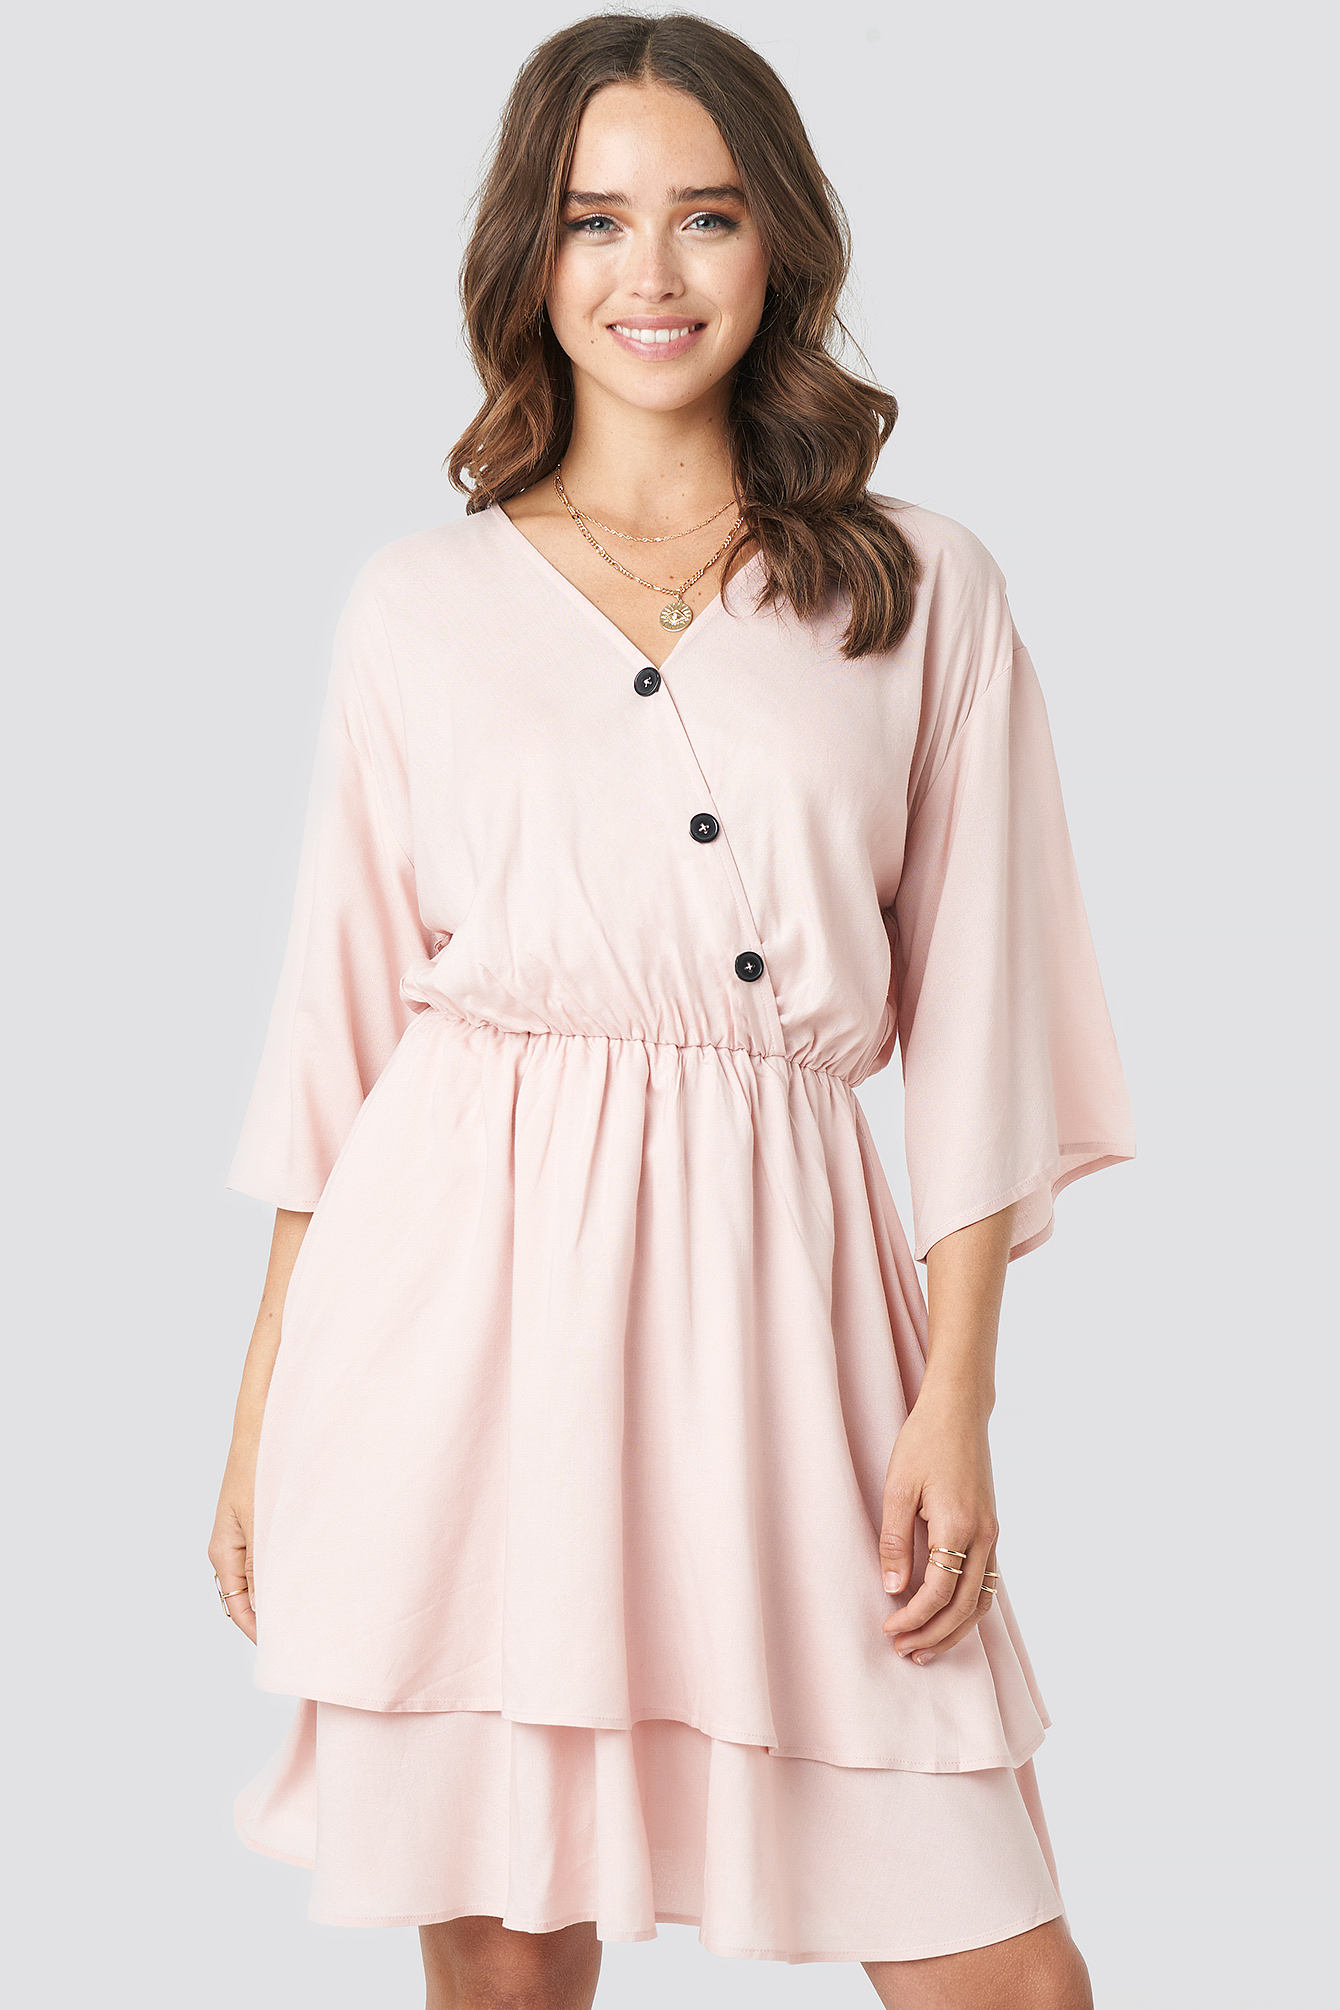 Nude Pink Contrast Button Layered Dress